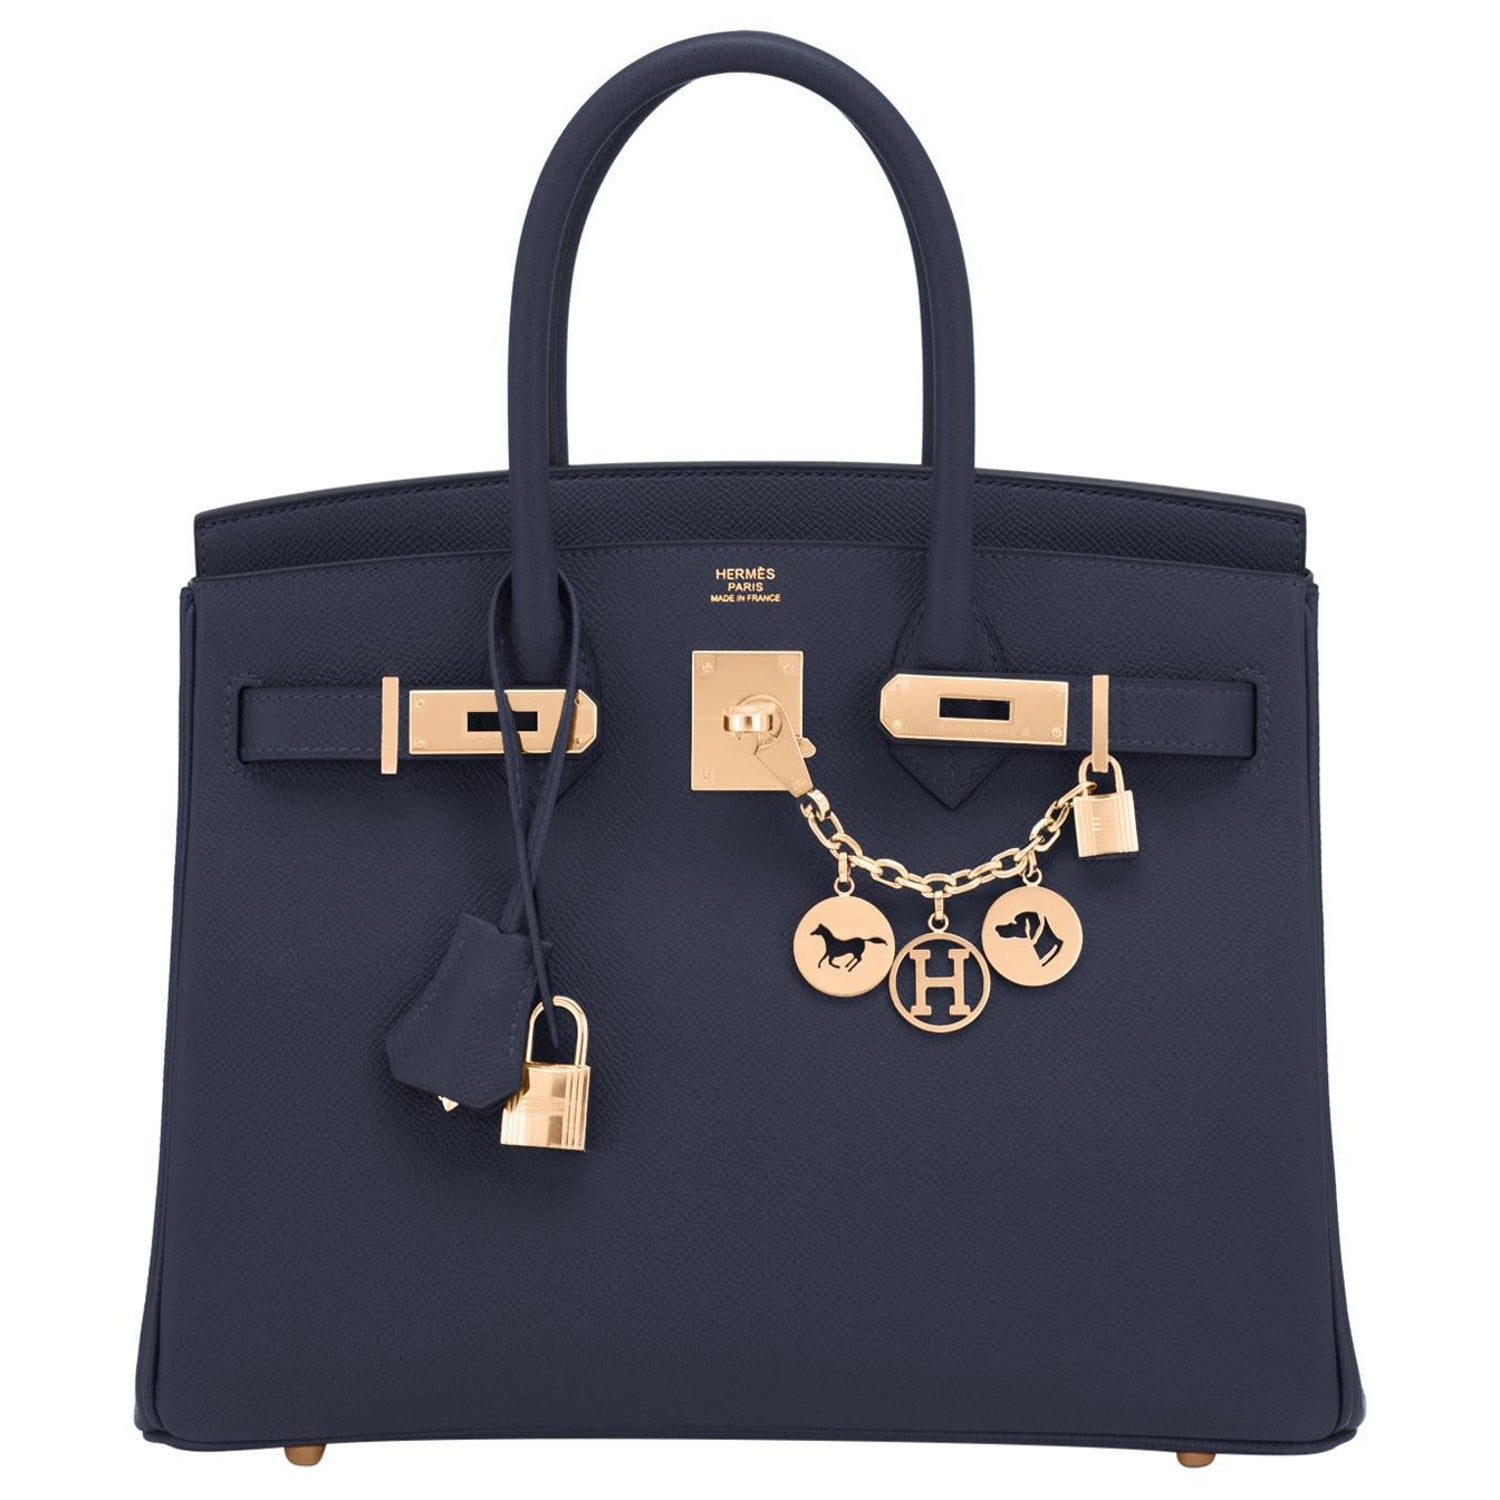 HERMES BAGS I WON'T BUY AND WHY  Hermes Lindy, Picotin, Garden Party and  Bolide 